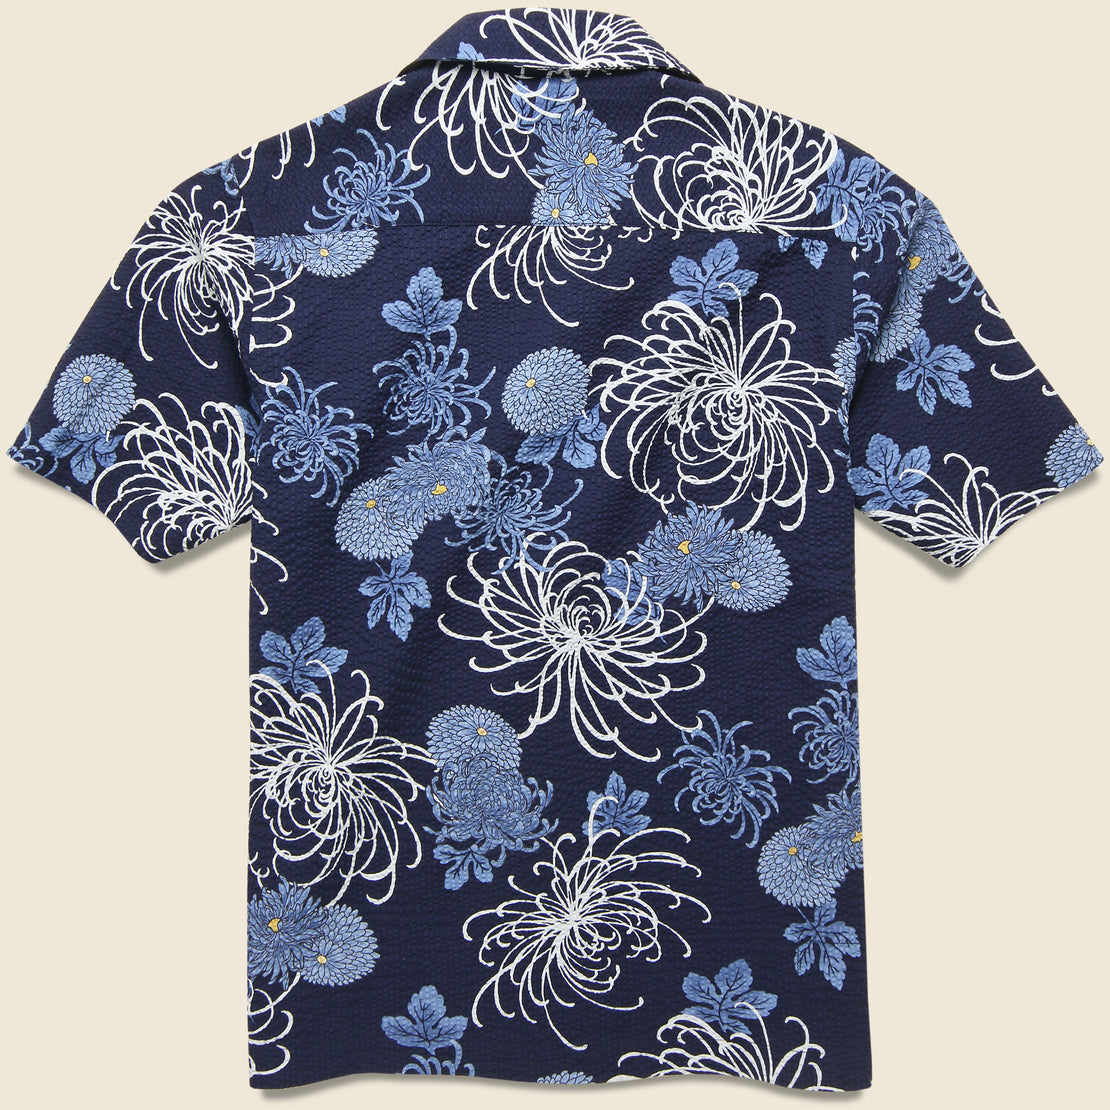 Japanese Flower Seersucker Shirt - Blue - Universal Works - STAG Provisions - Tops - S/S Woven - Floral